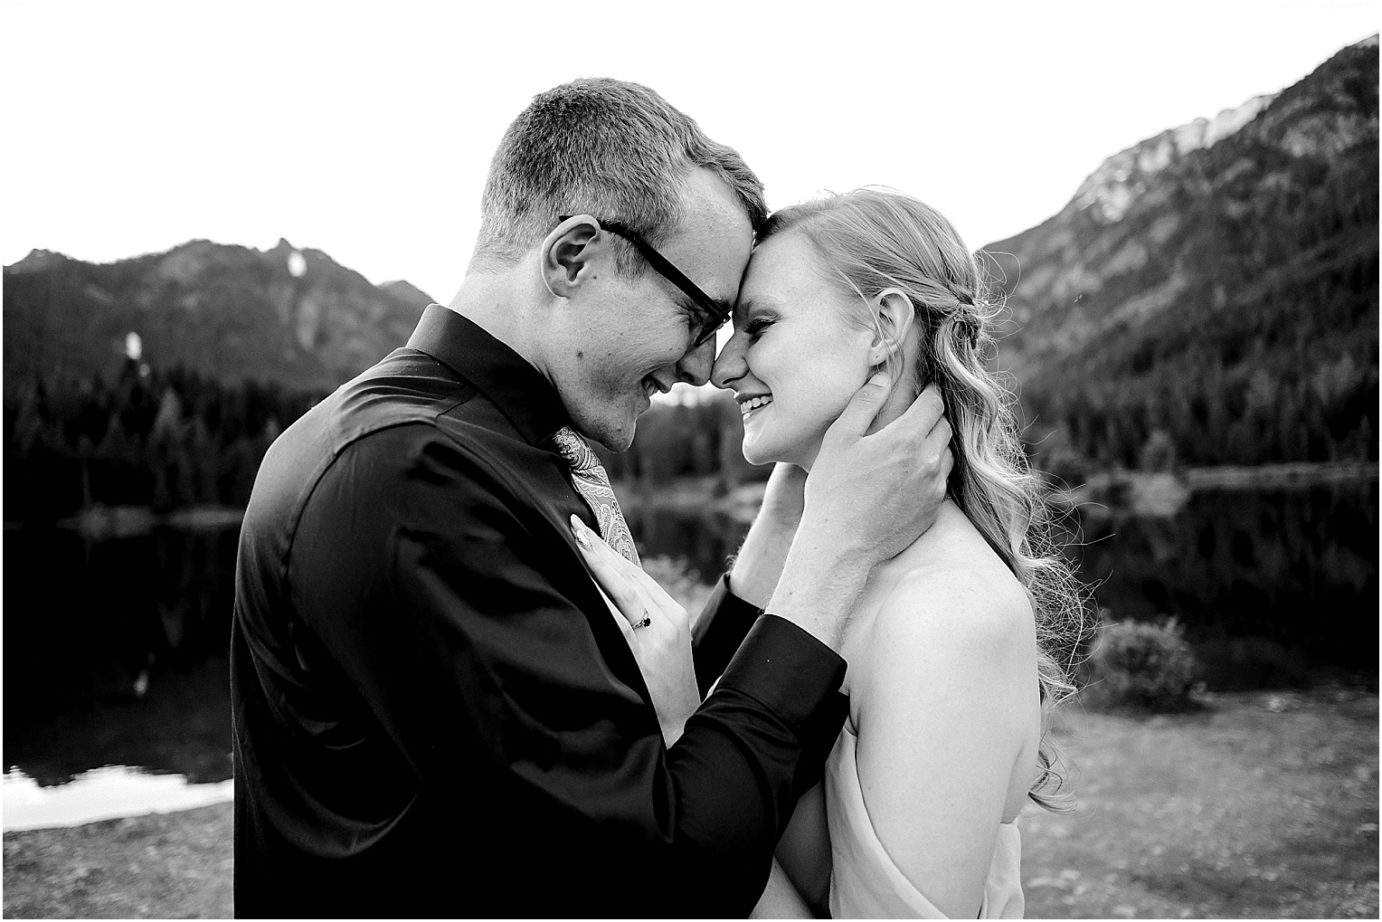 Couple hugging during snoqualmie pass engagement session